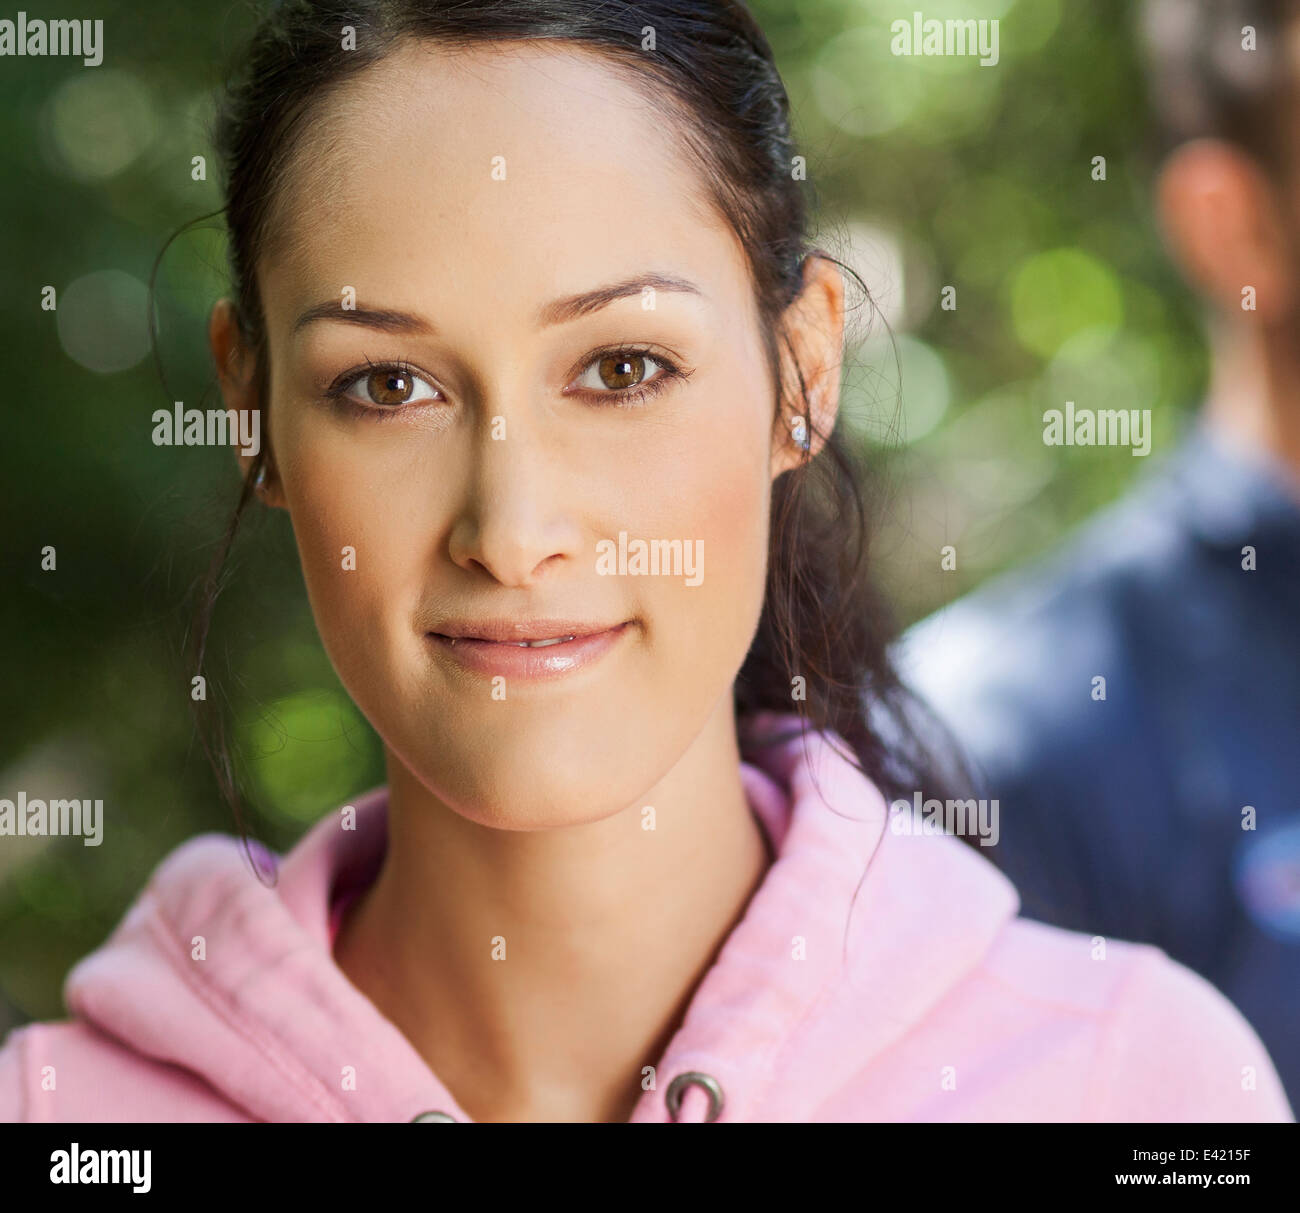 Young woman in pink hoodie Stock Photo - Alamy